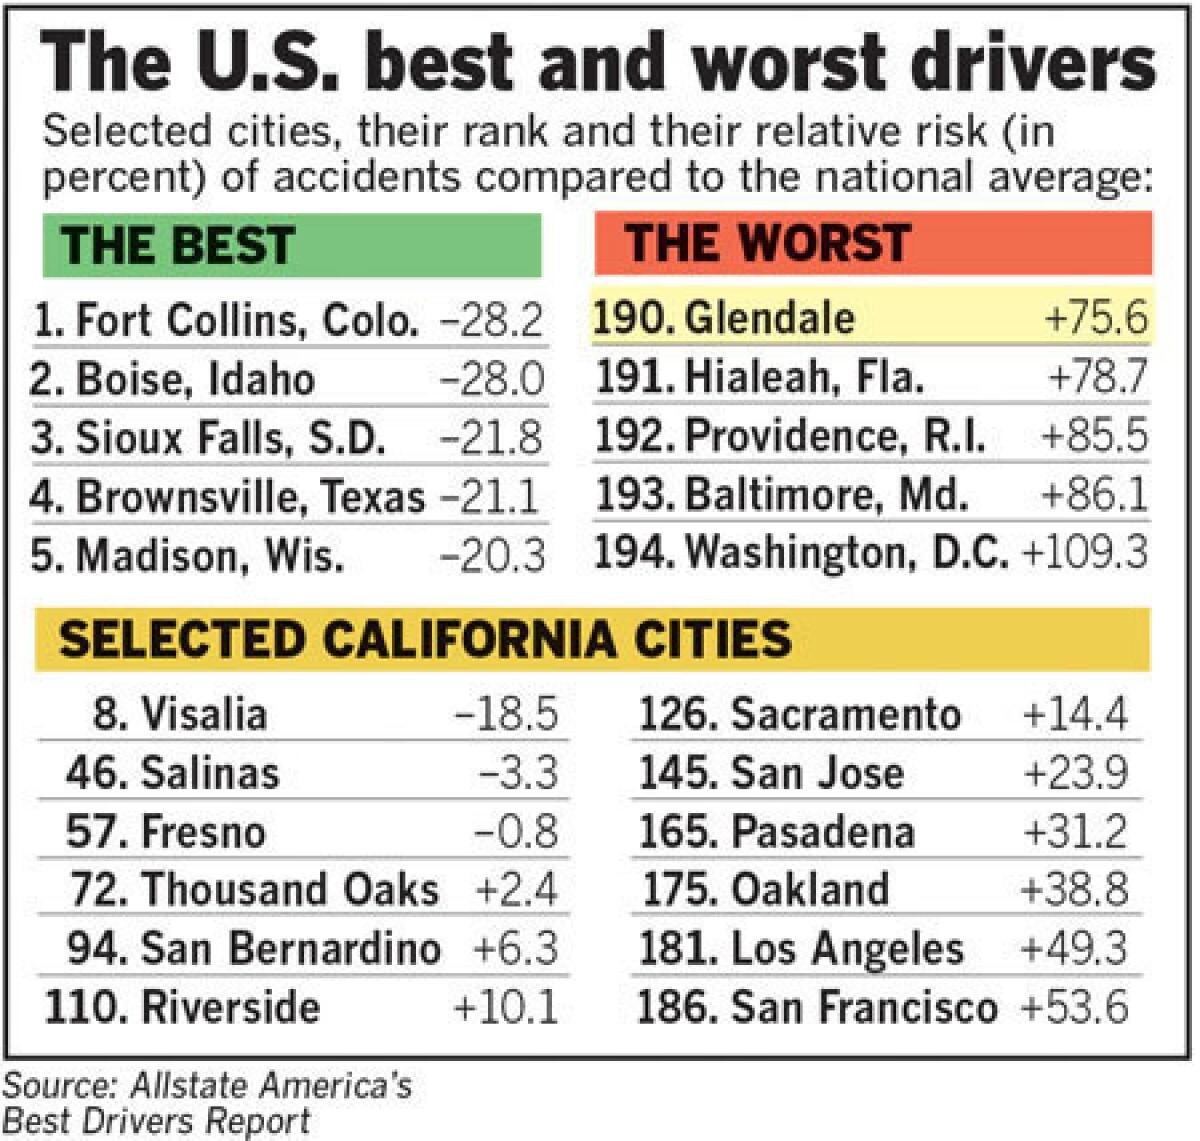 Glendale ranked last among cities in California for having the worst drivers, according to AllState America's Best Drivers Report.